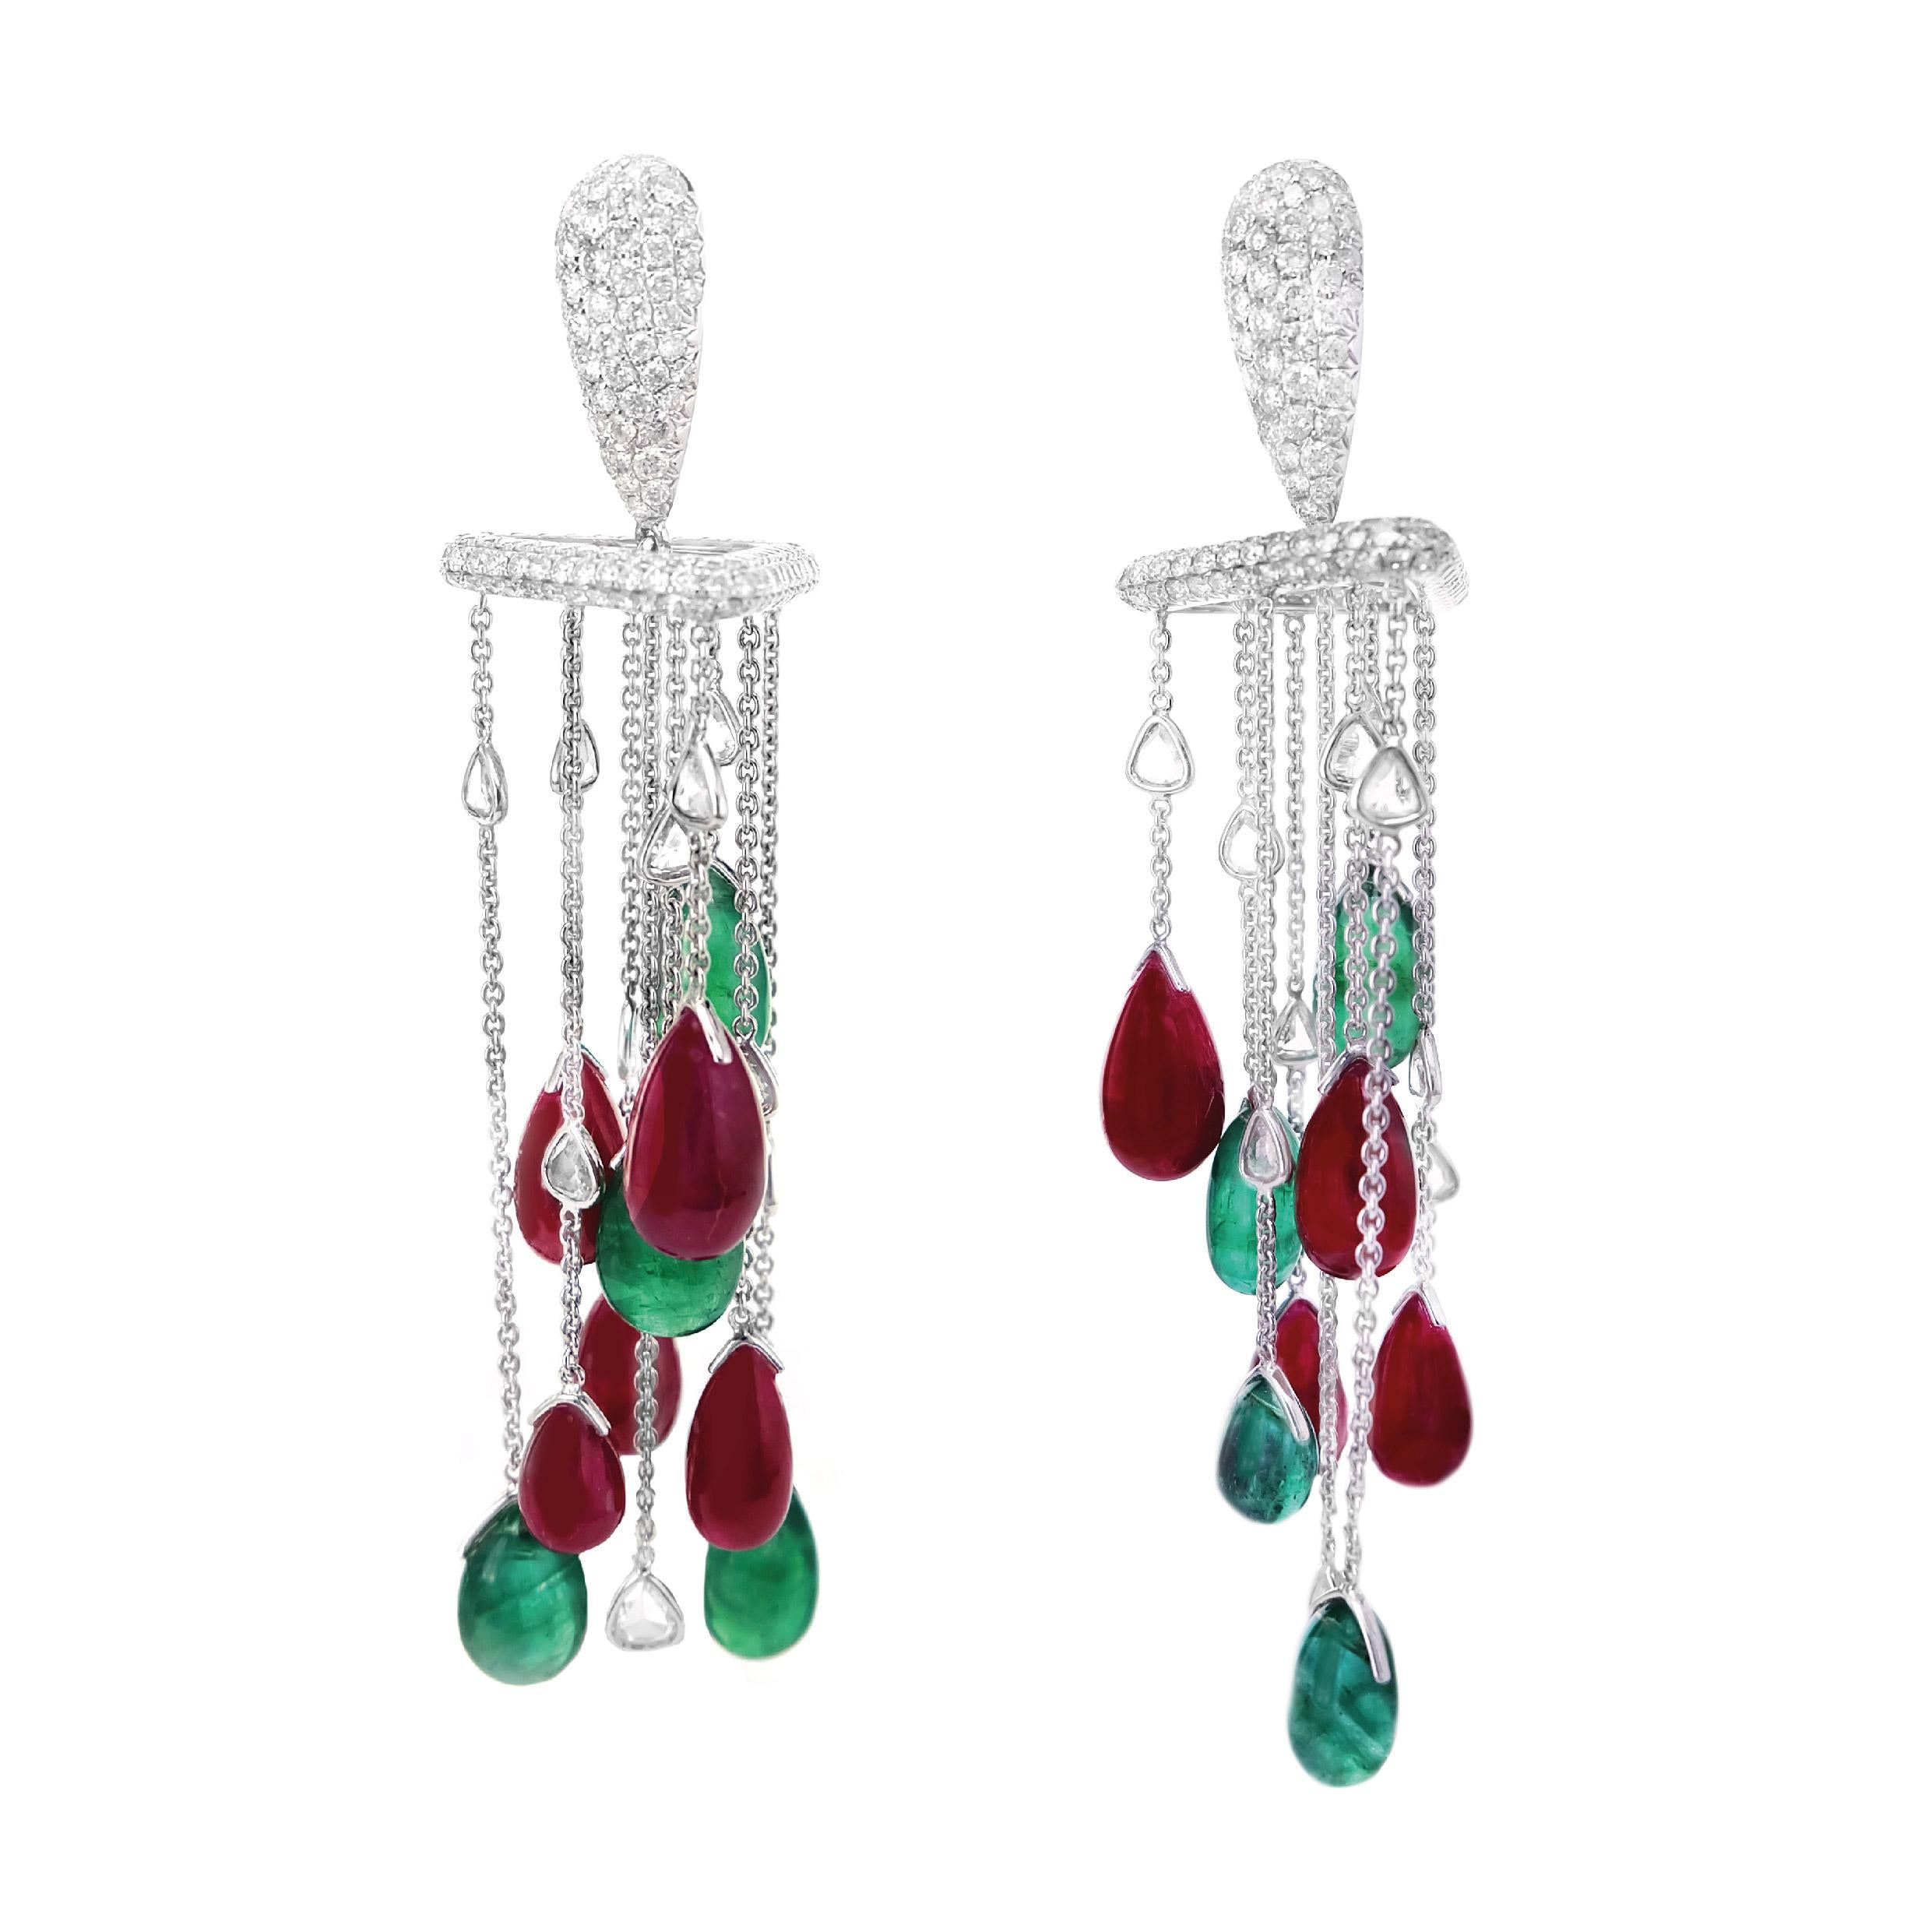 Blurring the lines between Physics and fine jewelry making, the earring is a a perfect example of complicated engineering and luxury blending together. A total of 23.18 carats of Emerald, 35.47 carats of Ruby and 6 carats of white brilliant diamond